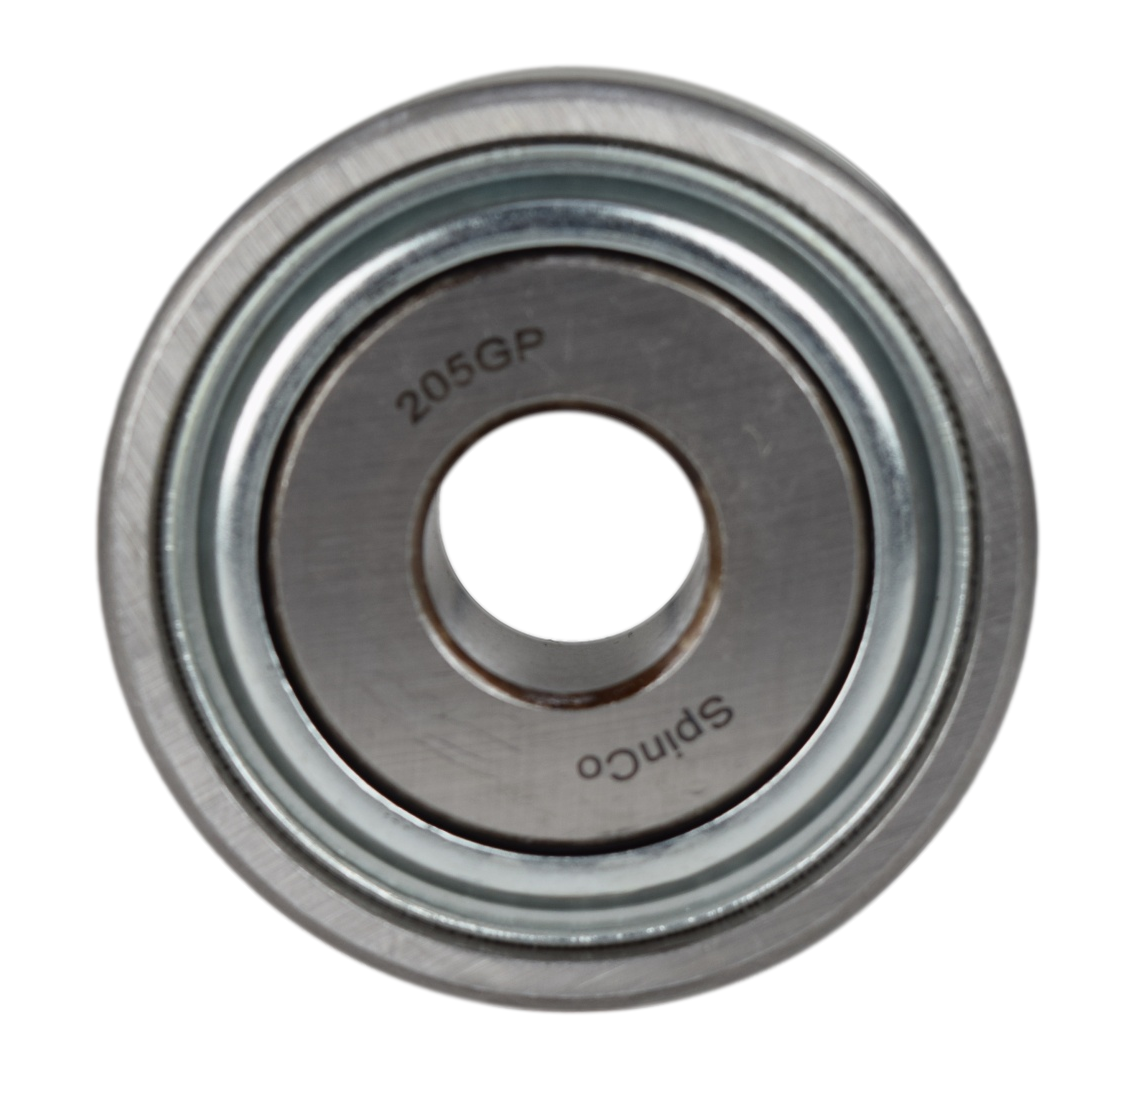 205GP, 205DDS 5/8, 188-001V Special Ag Bearing SpinCo205GP, 205DDS Special Ag Bearing